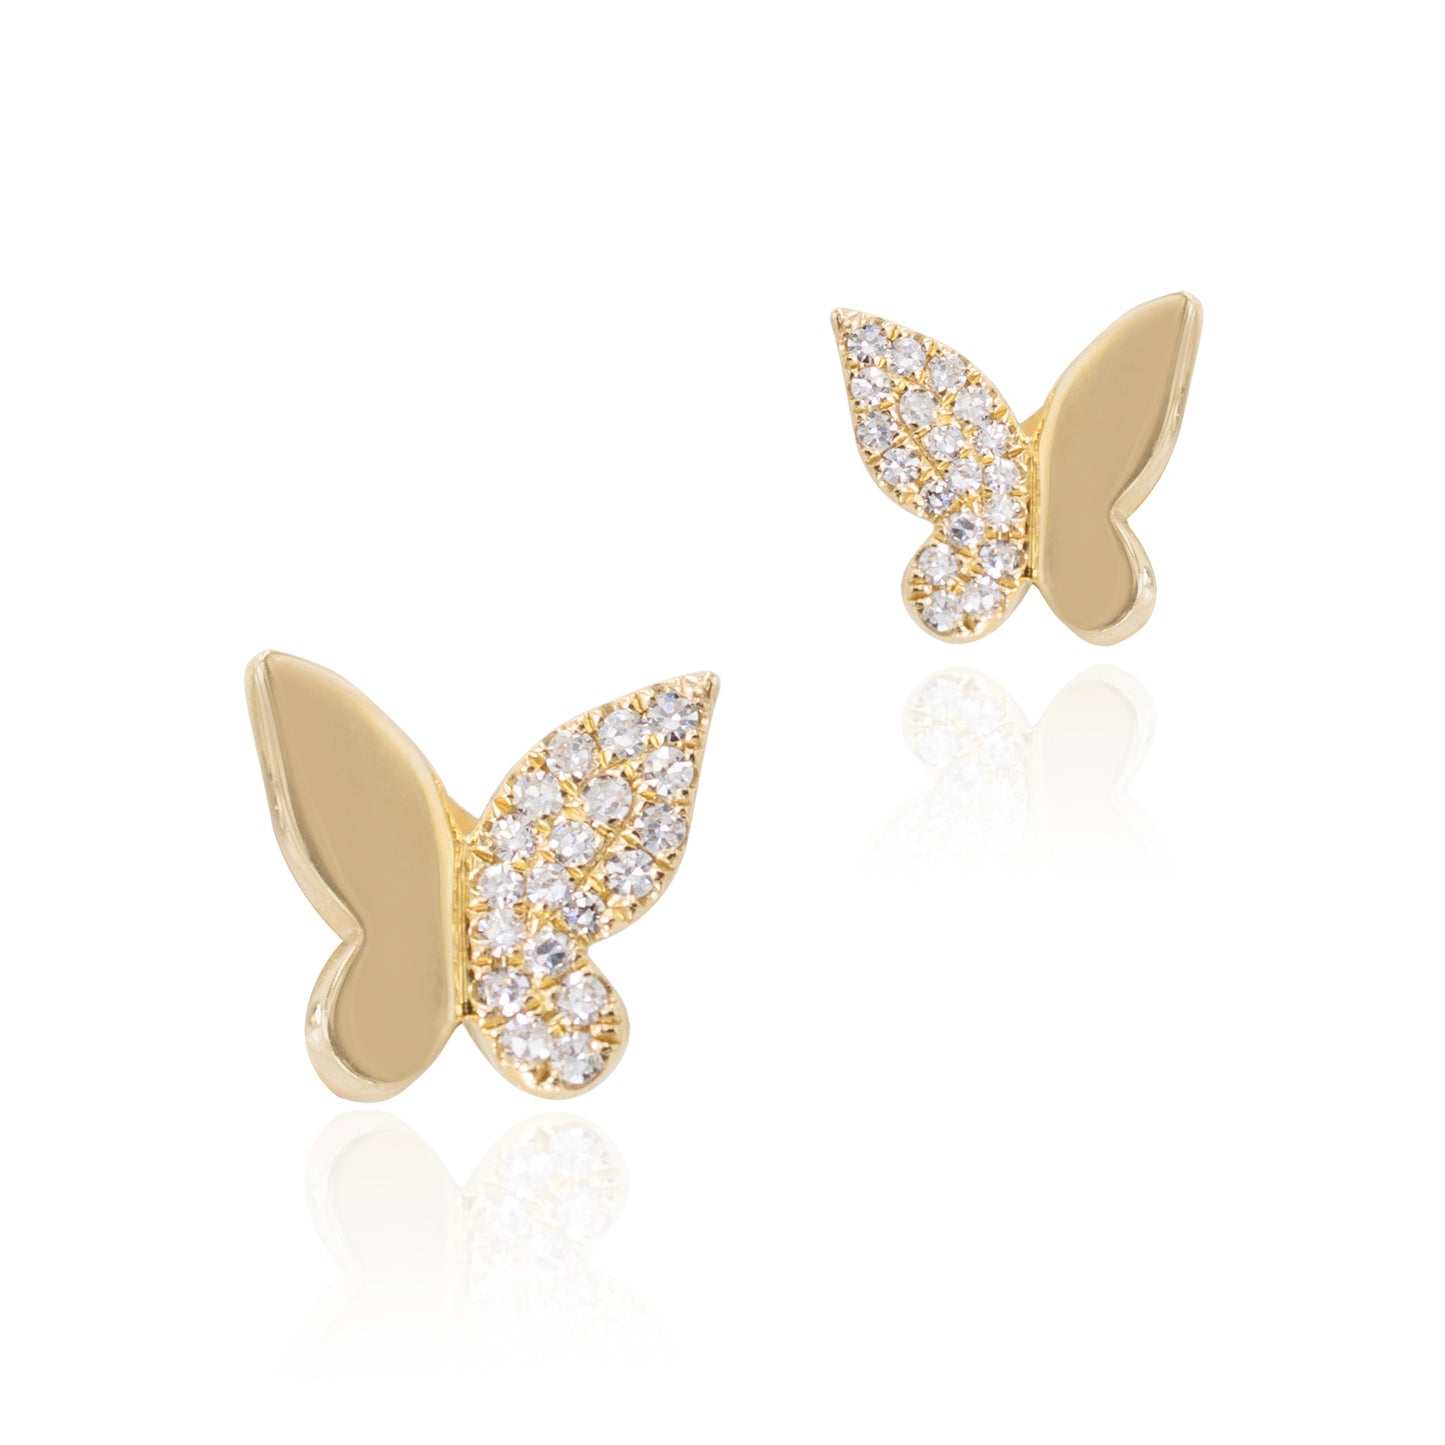 GOLD AND DIAMOND BUTTERFLY EARRINGS